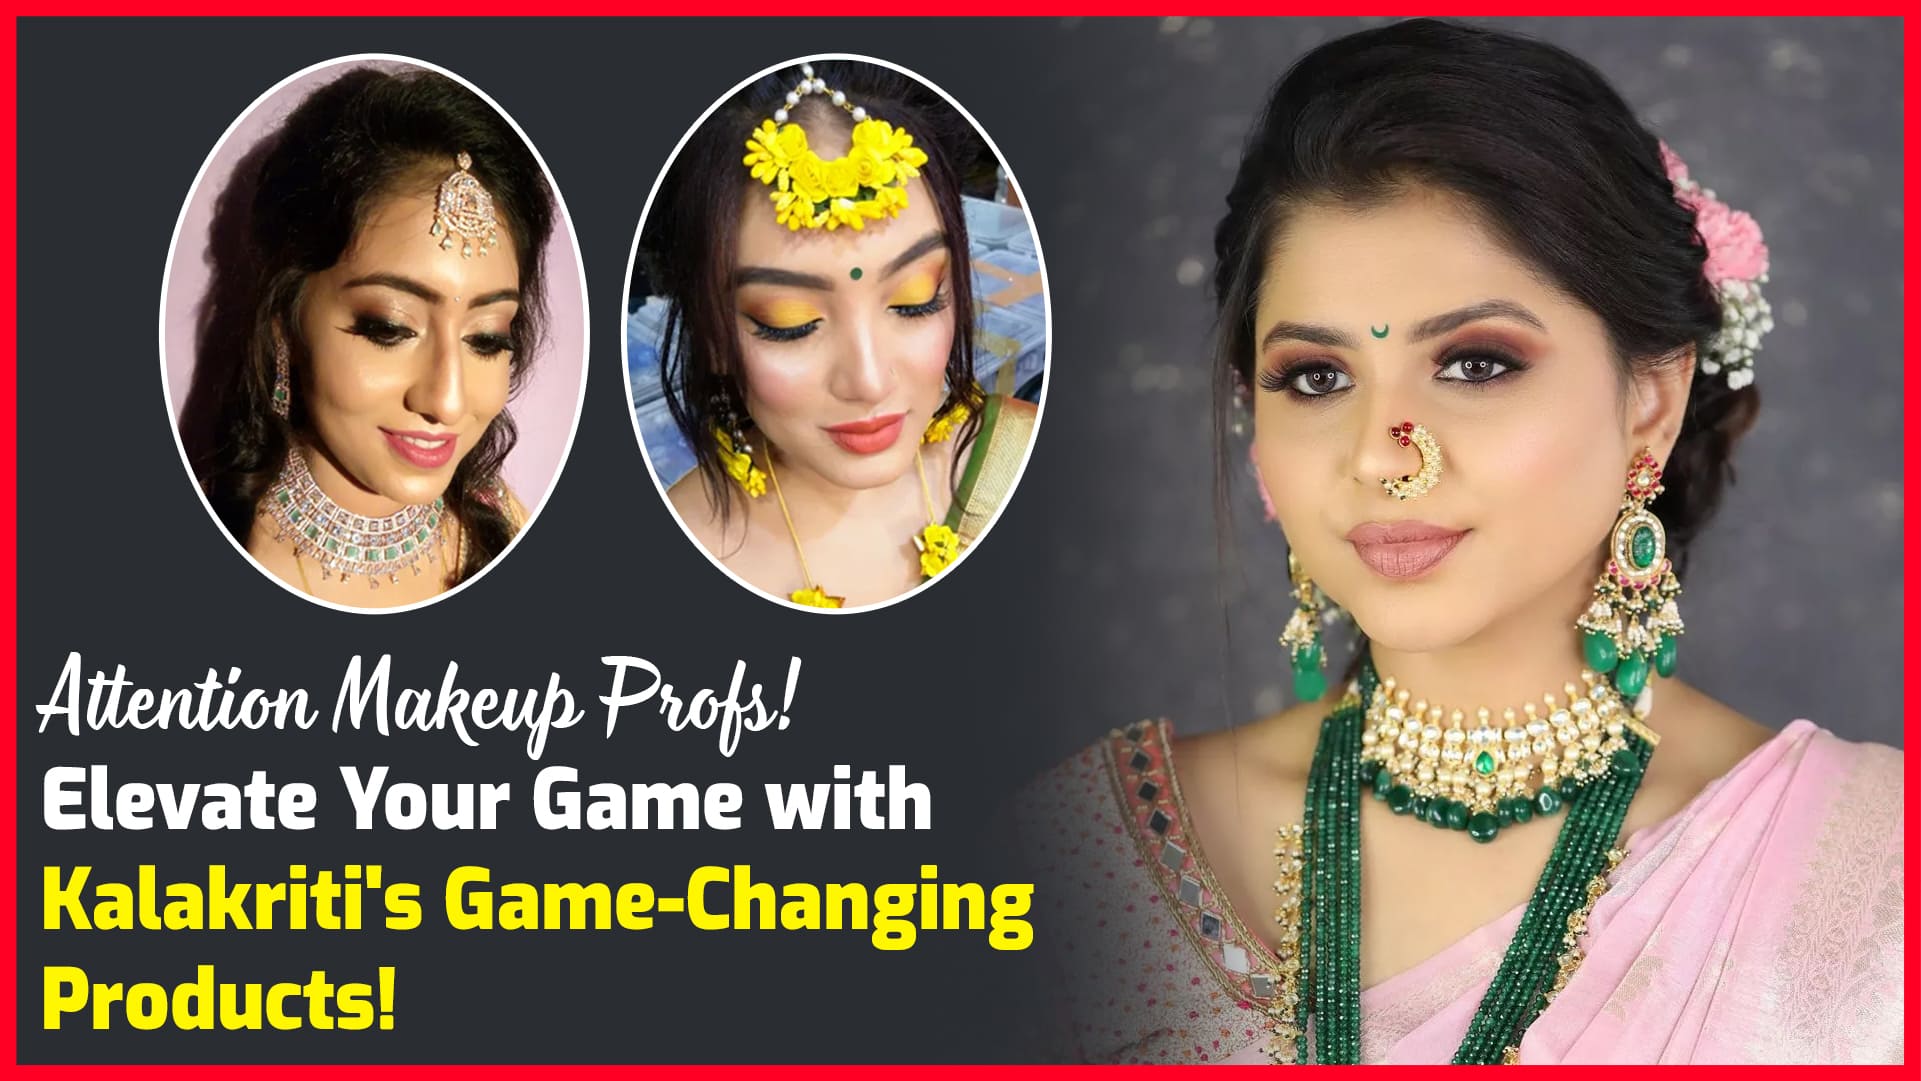 Attention Makeup Profs! Elevate Your Game with Kalakriti's Game-Changing Products!